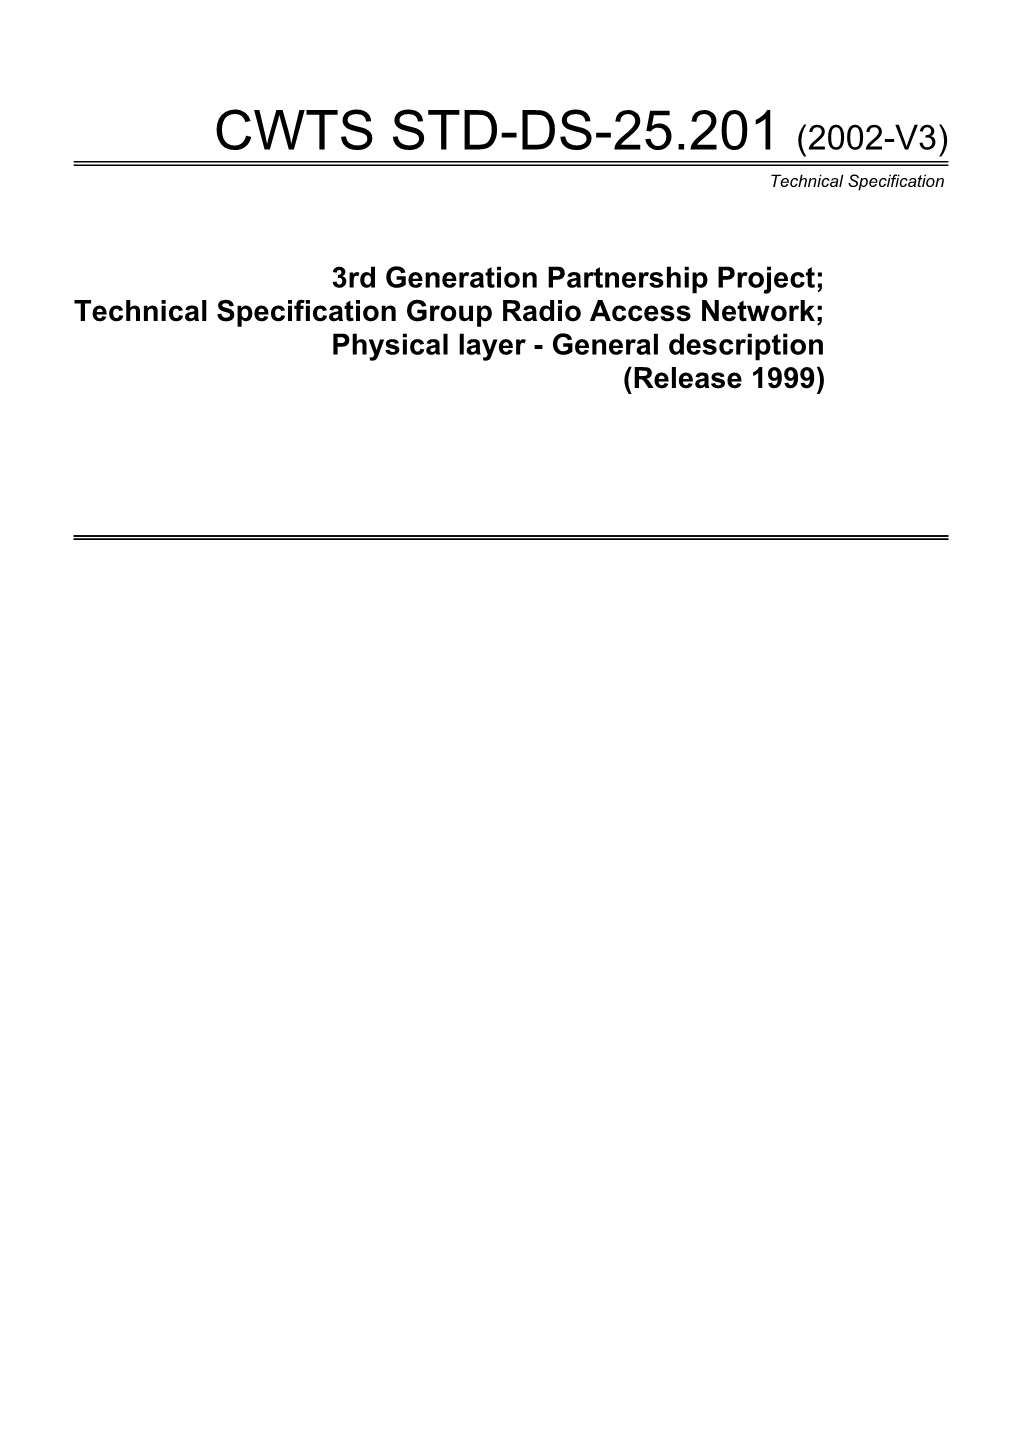 Technical Specification Group Radio Access Network; s1